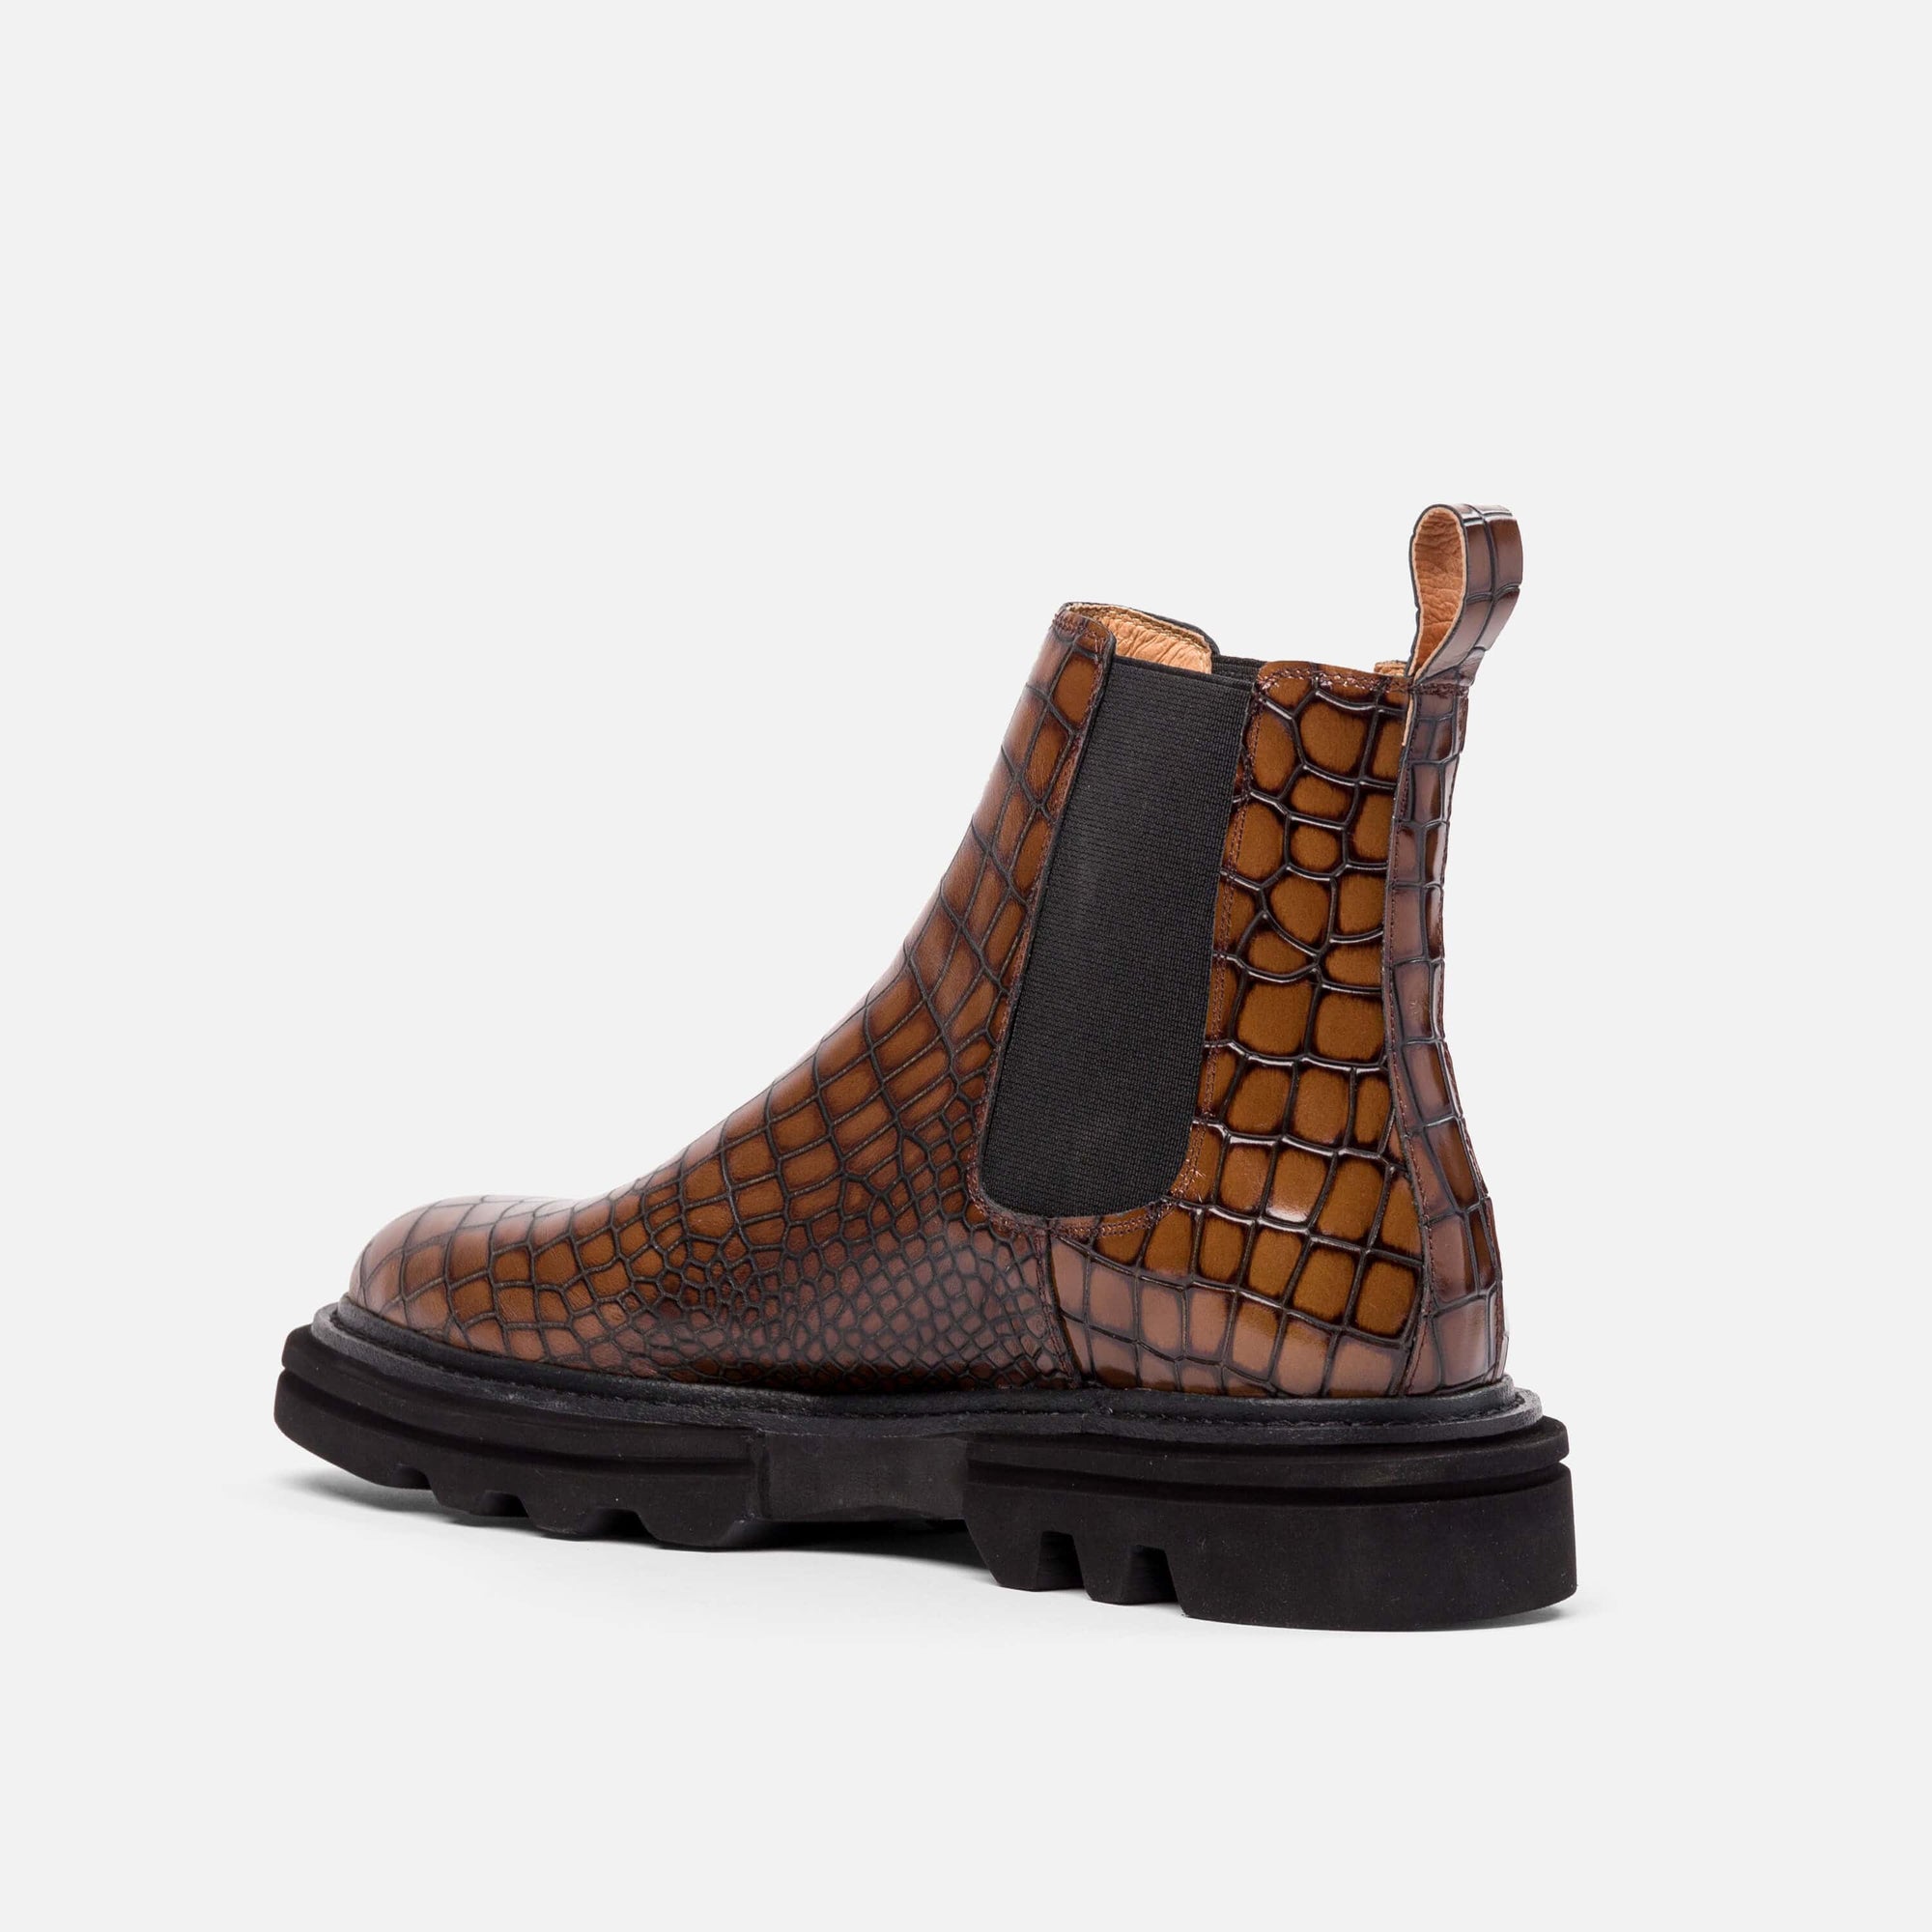 Dax Brown Crocskin Leather Chelsea Boots